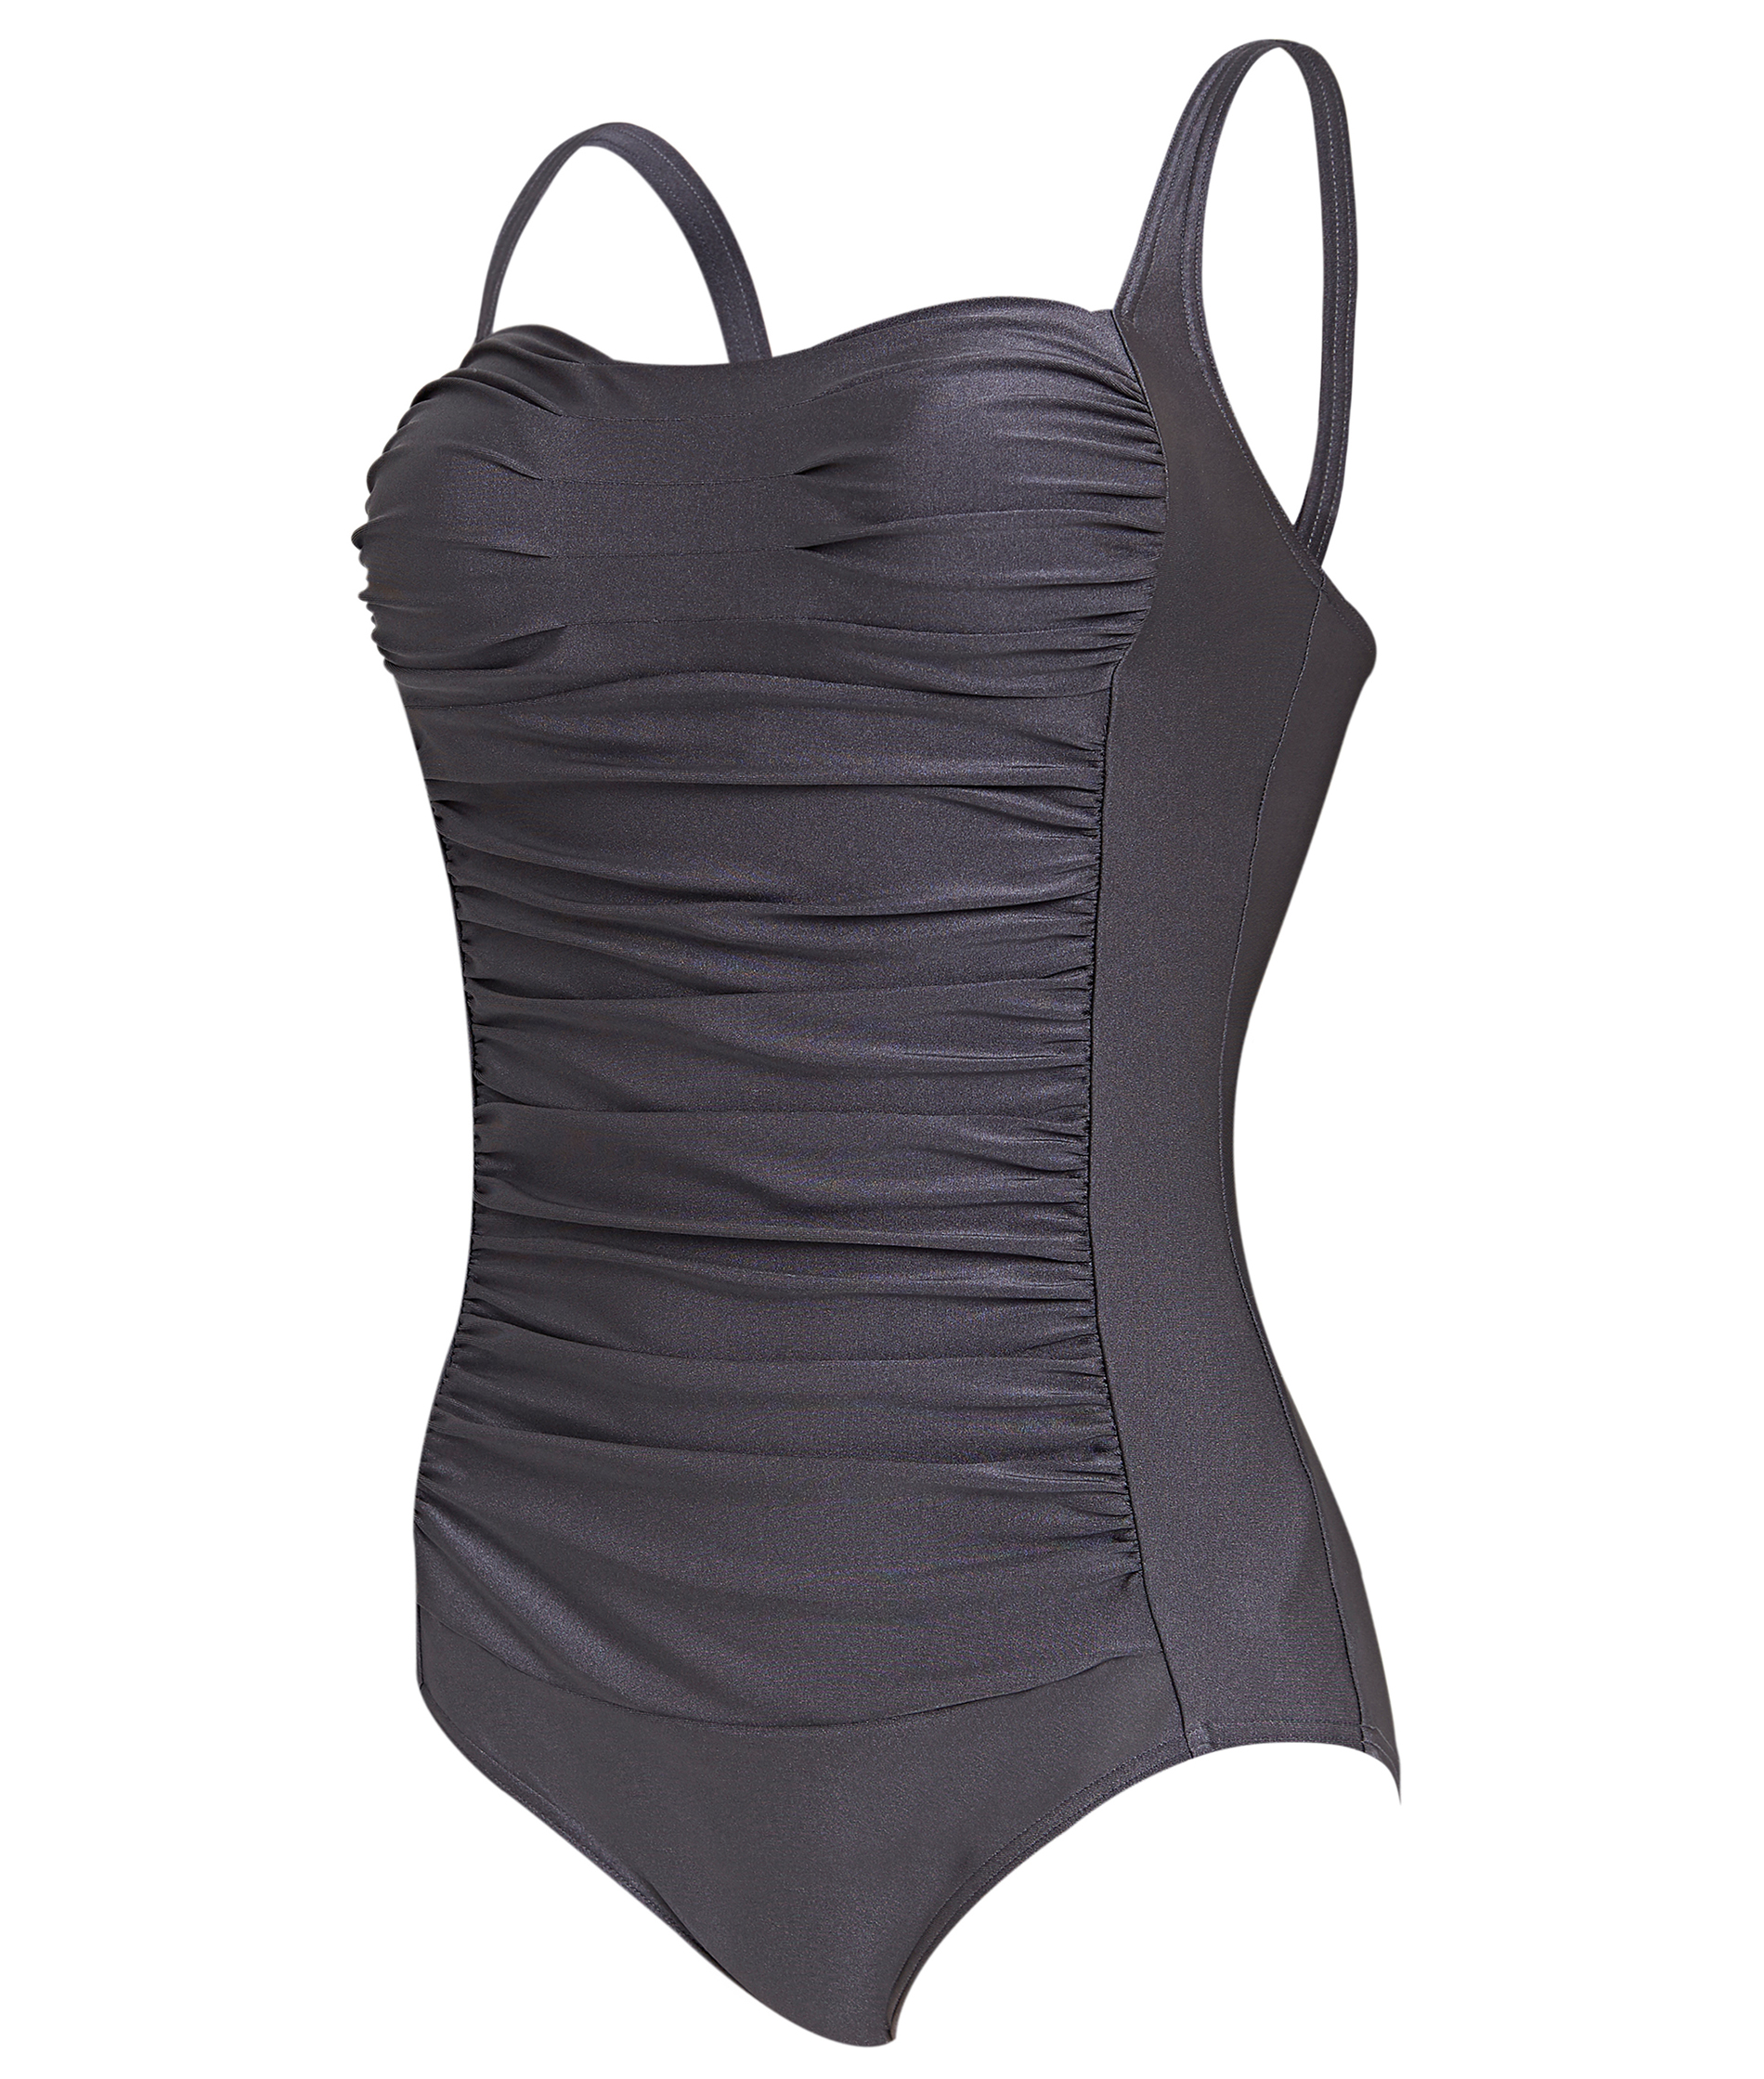 Zoggs Ladies Bruny Ruch Front Swimsuit